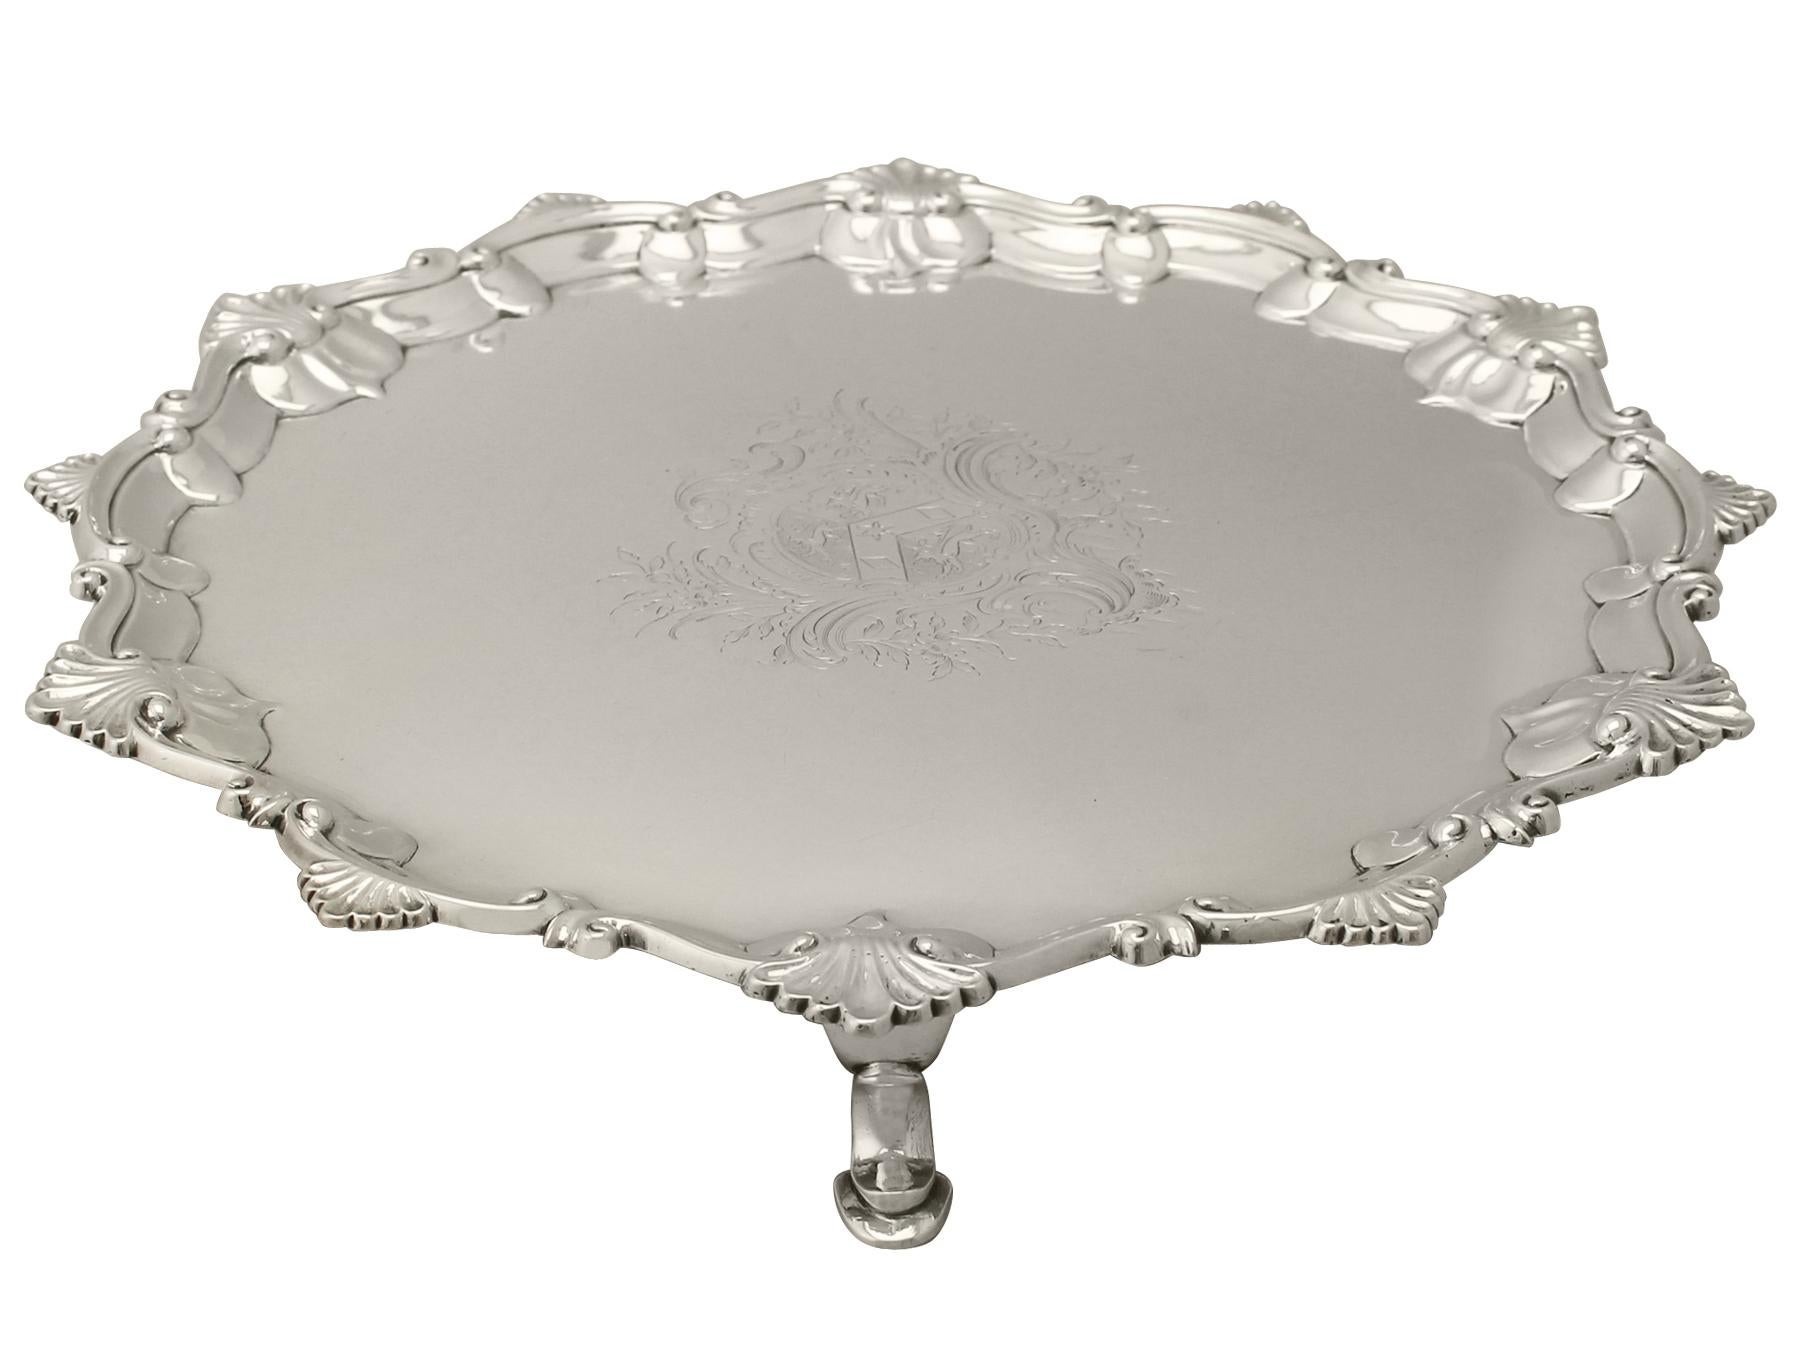 An exceptional, fine and impressive antique George III English sterling silver salver; an addition to our Georgian dining silverware collection.

This exceptional antique George III salver in sterling silver has a plain circular shaped, classic